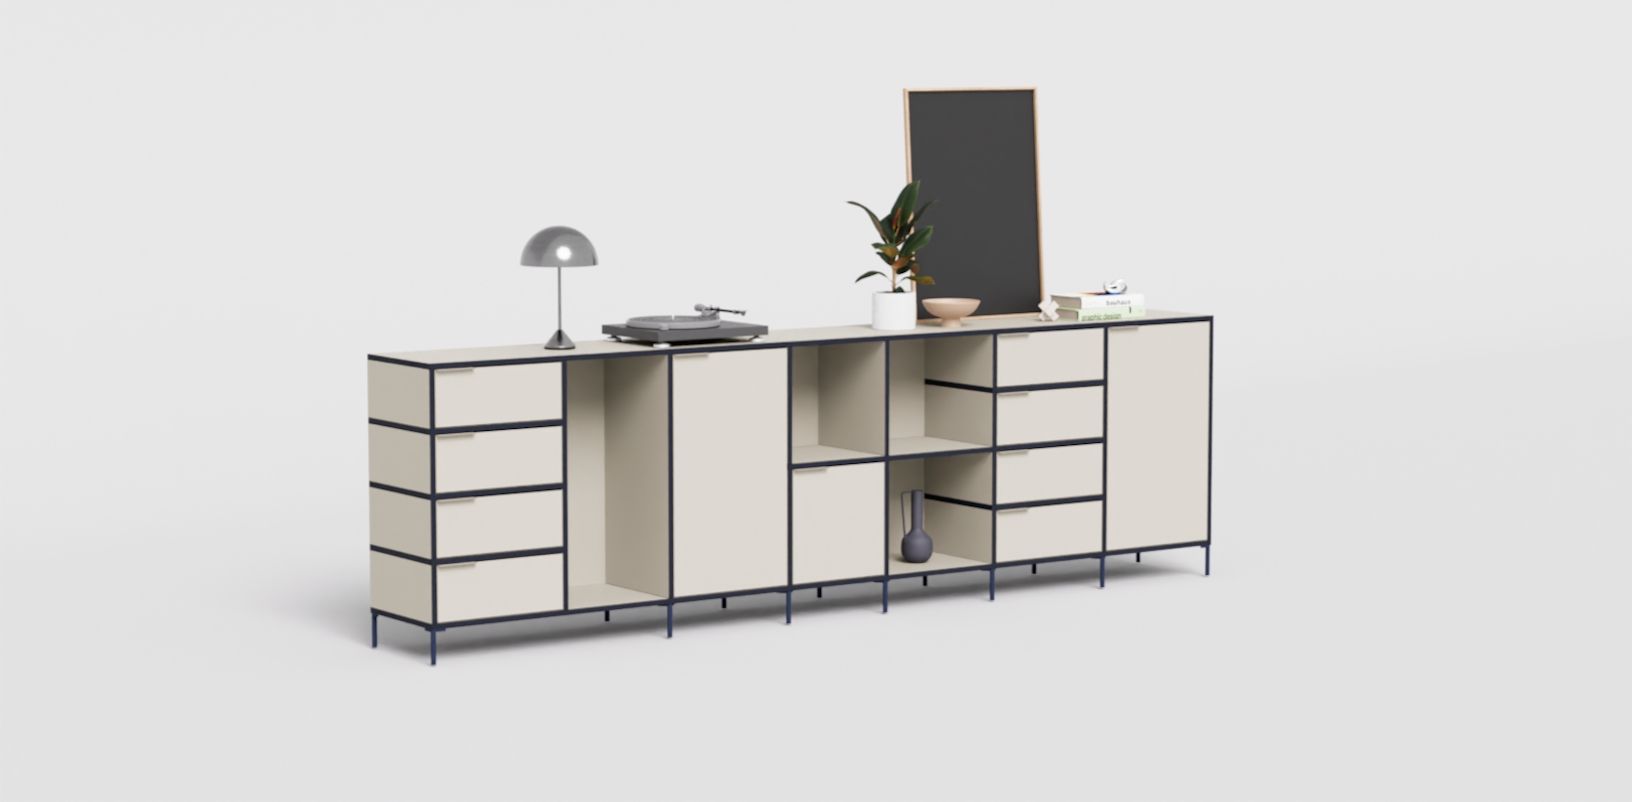 Sideboard in Beige and Blue with Doors and Drawers